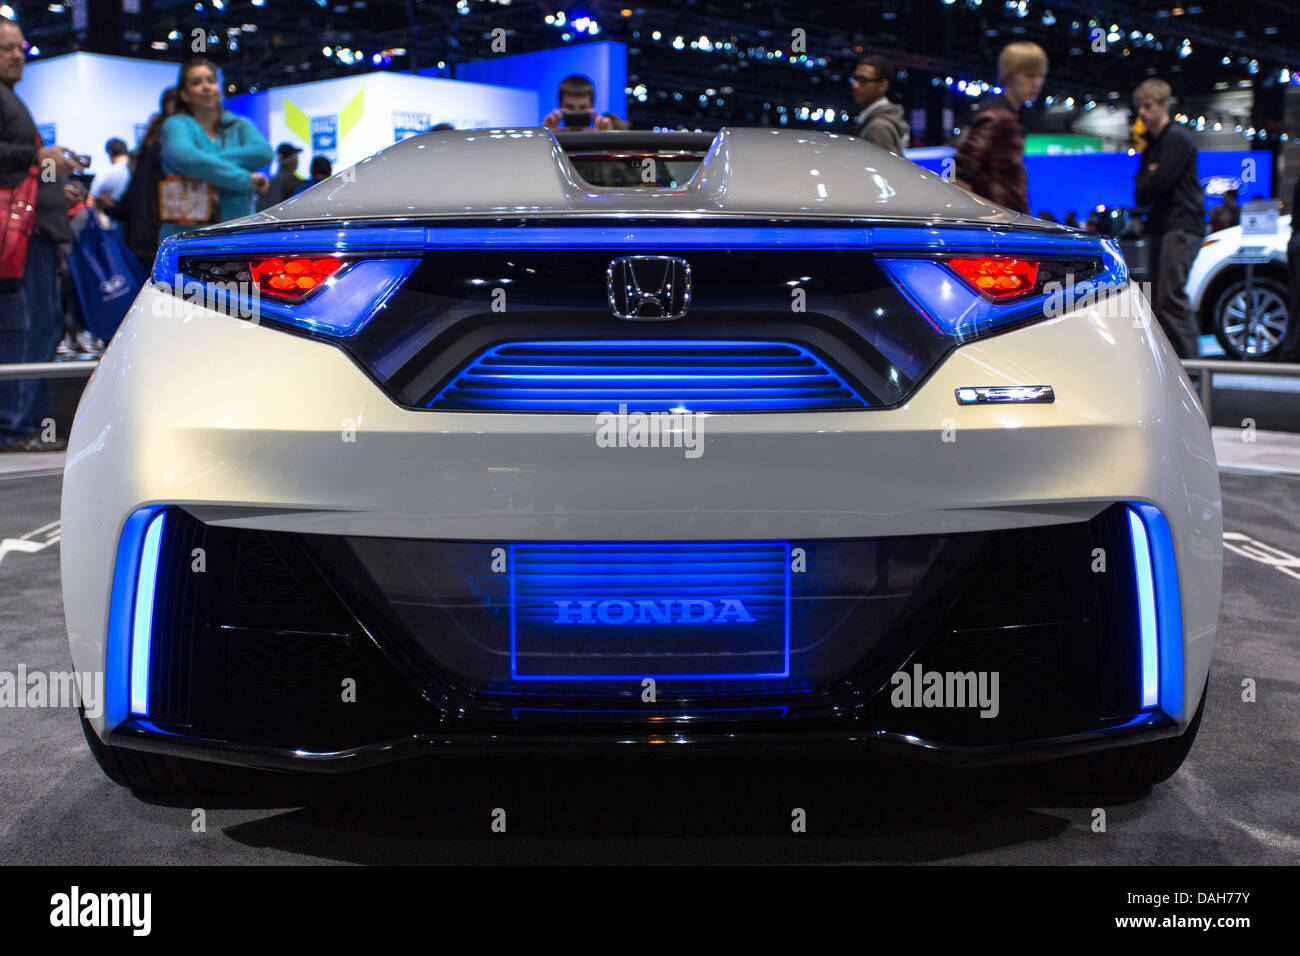 Honda Ev Ster Concept Electric Vehicle At Chicago Auto Show 13 Stock Photo Alamy